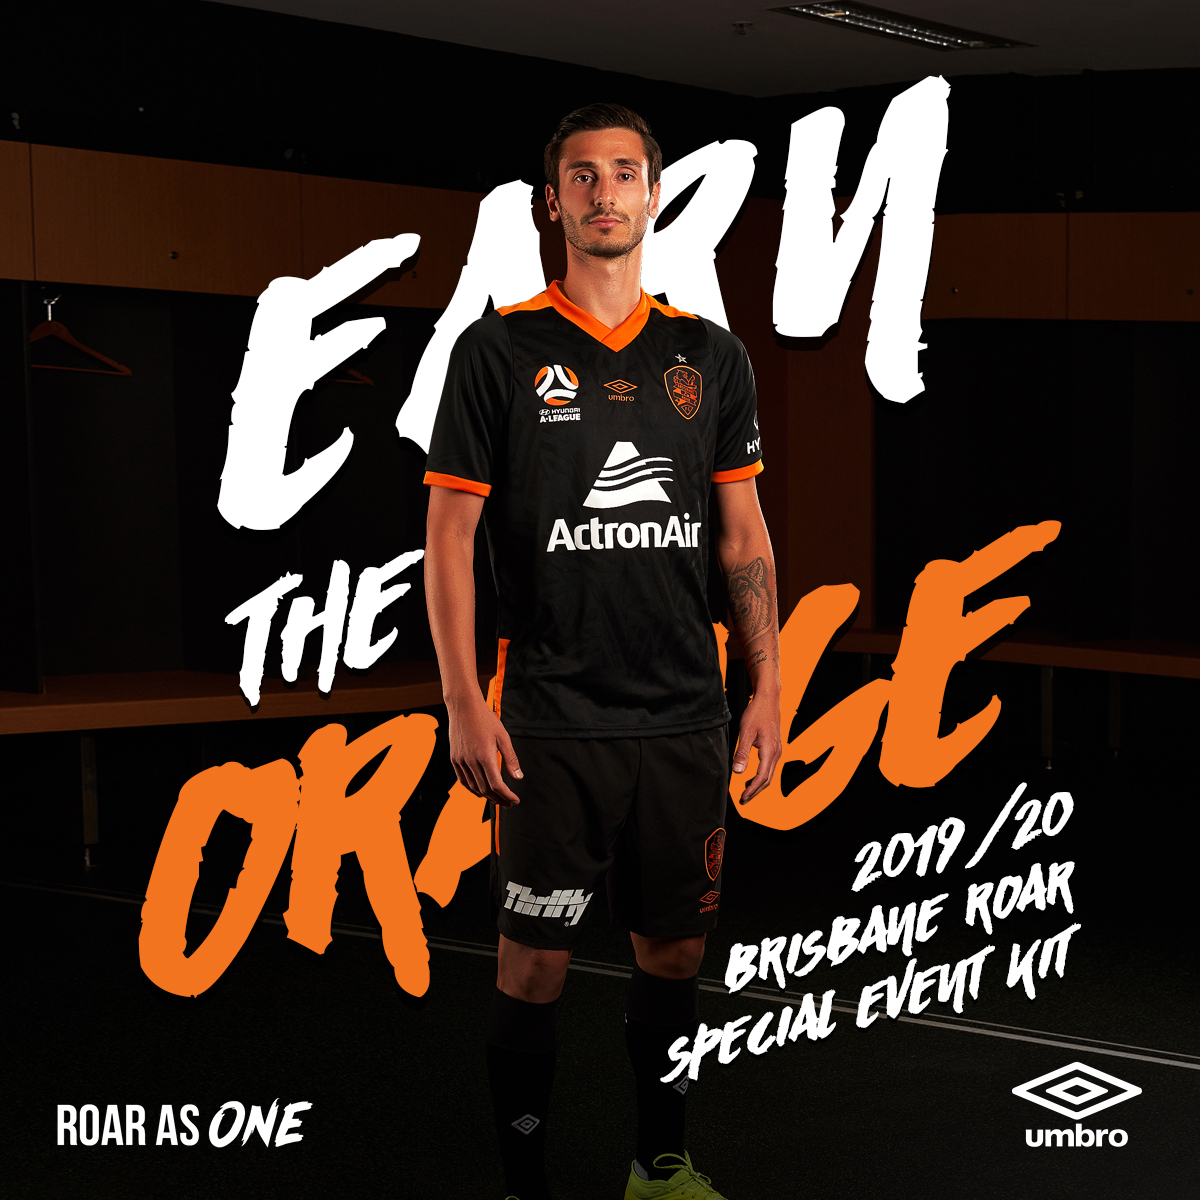 2019/20 BRFC Special Event Kit